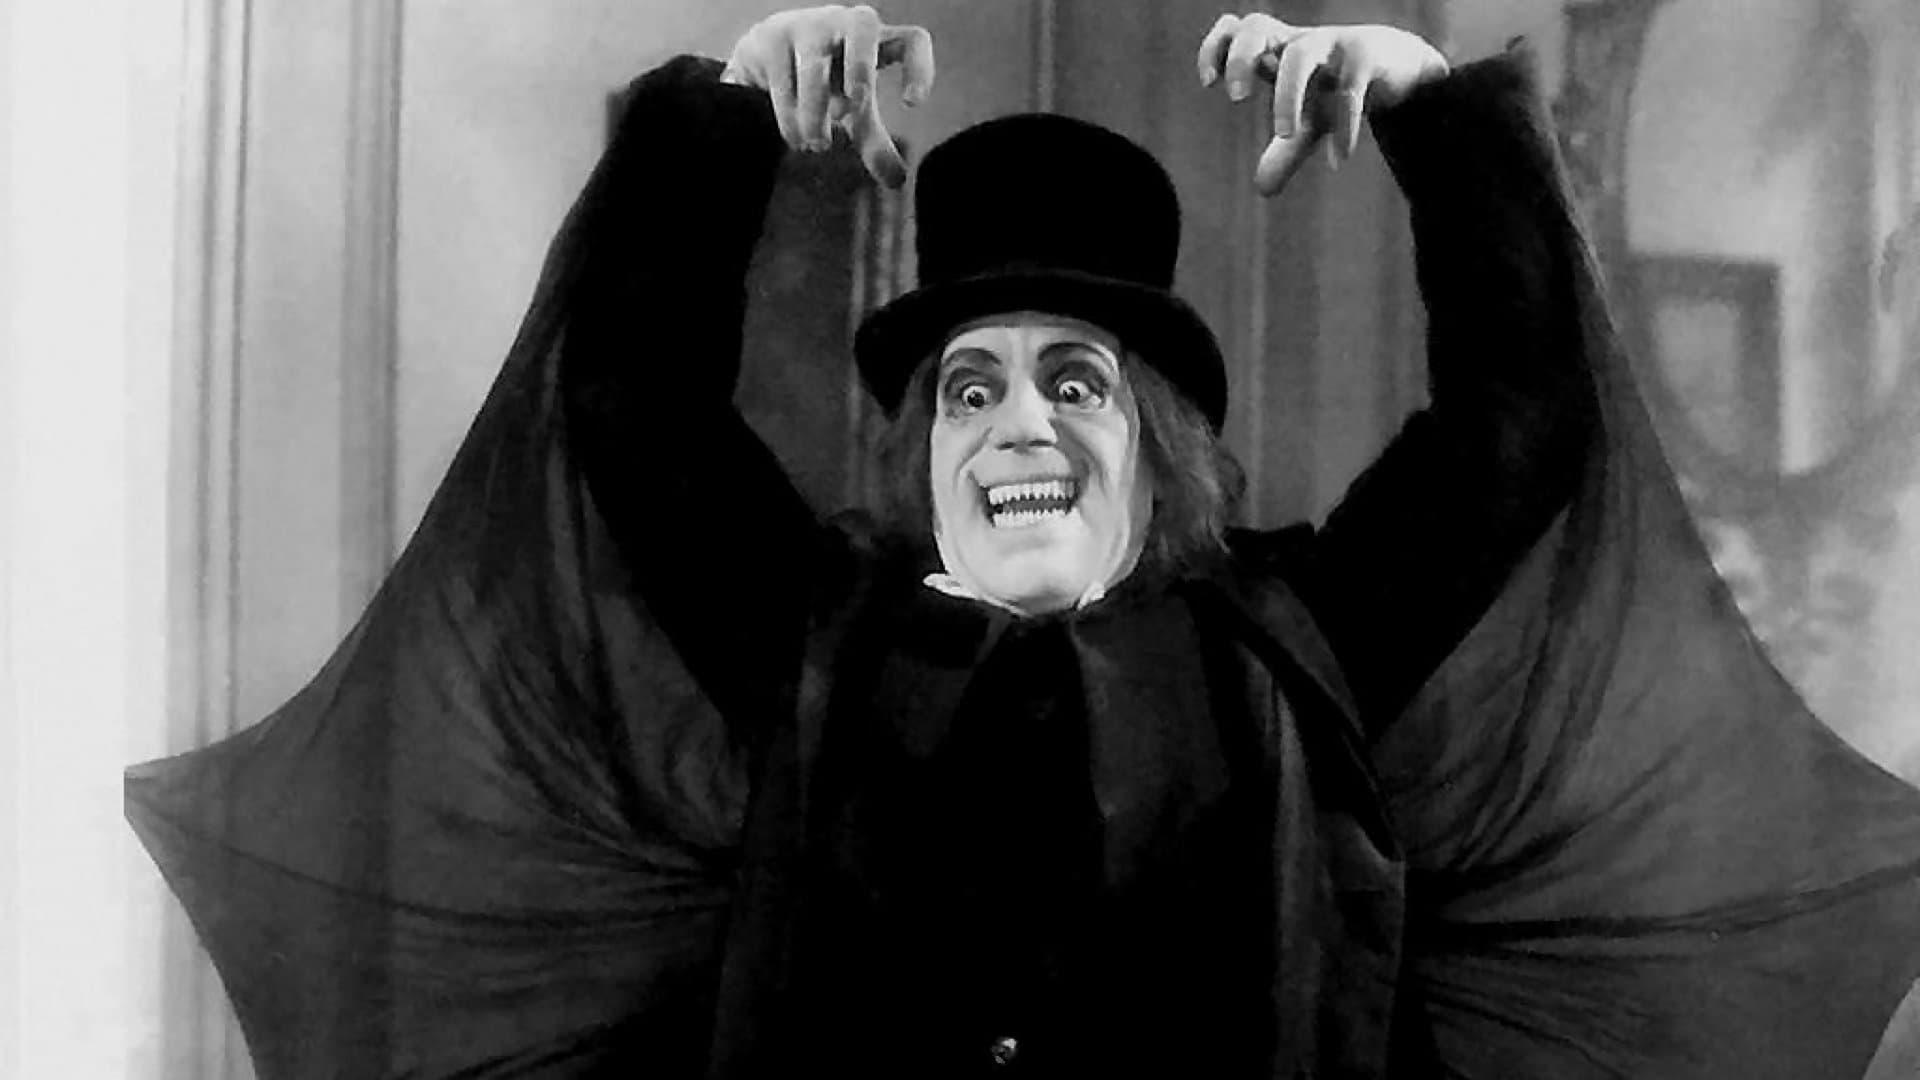 London After Midnight backdrop